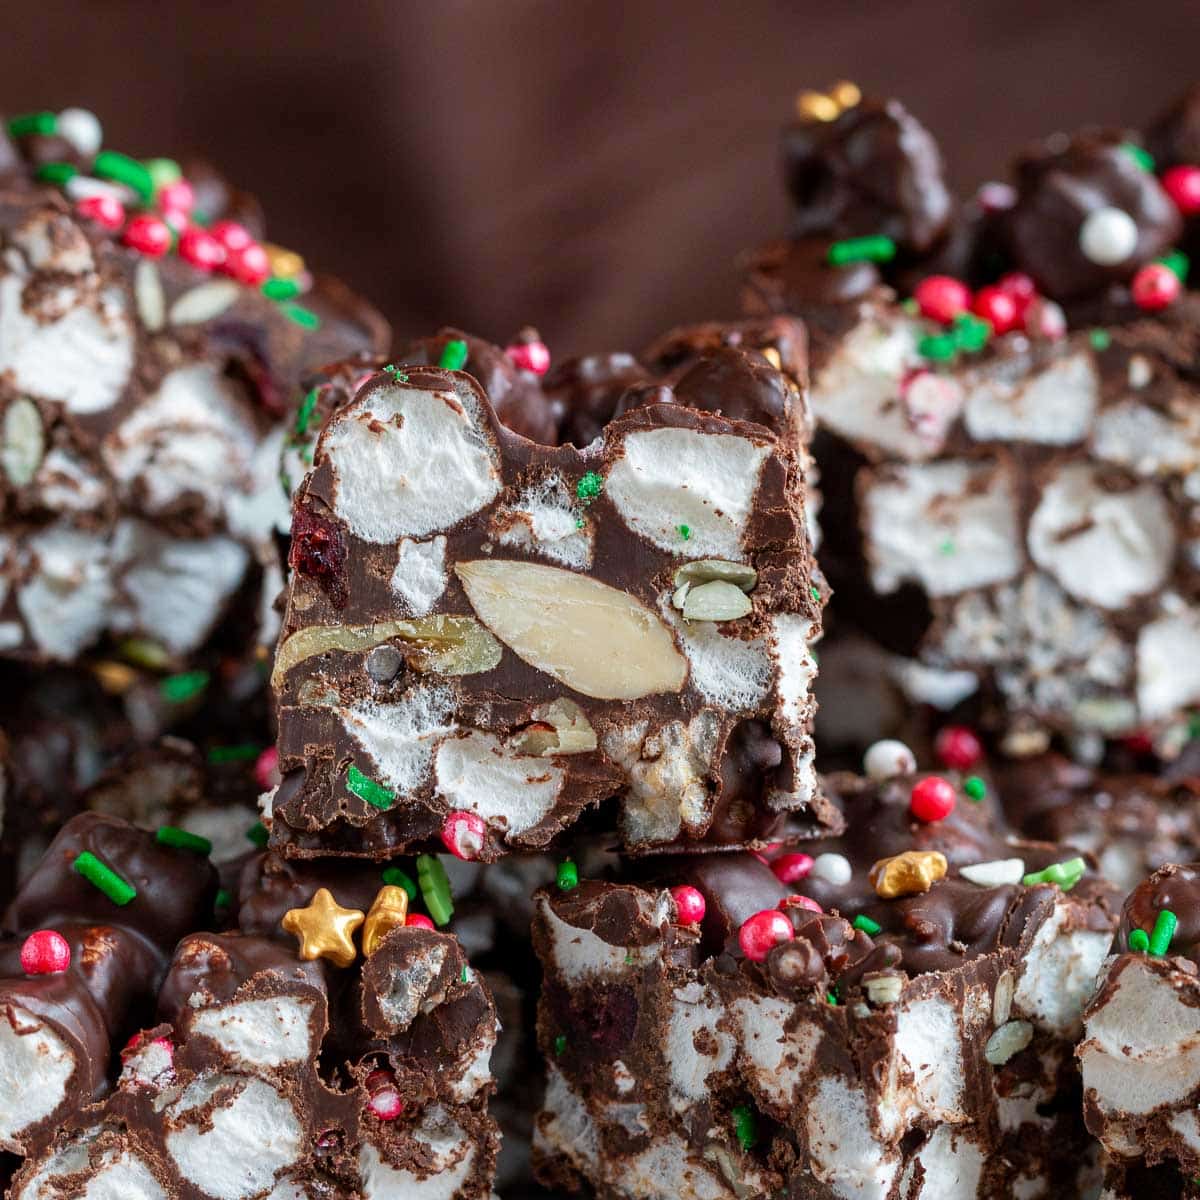 Chocolate rice cake rocky road bars slices sticked on a plate showing the crispy rice cakes, marshmallows and all the add ins.